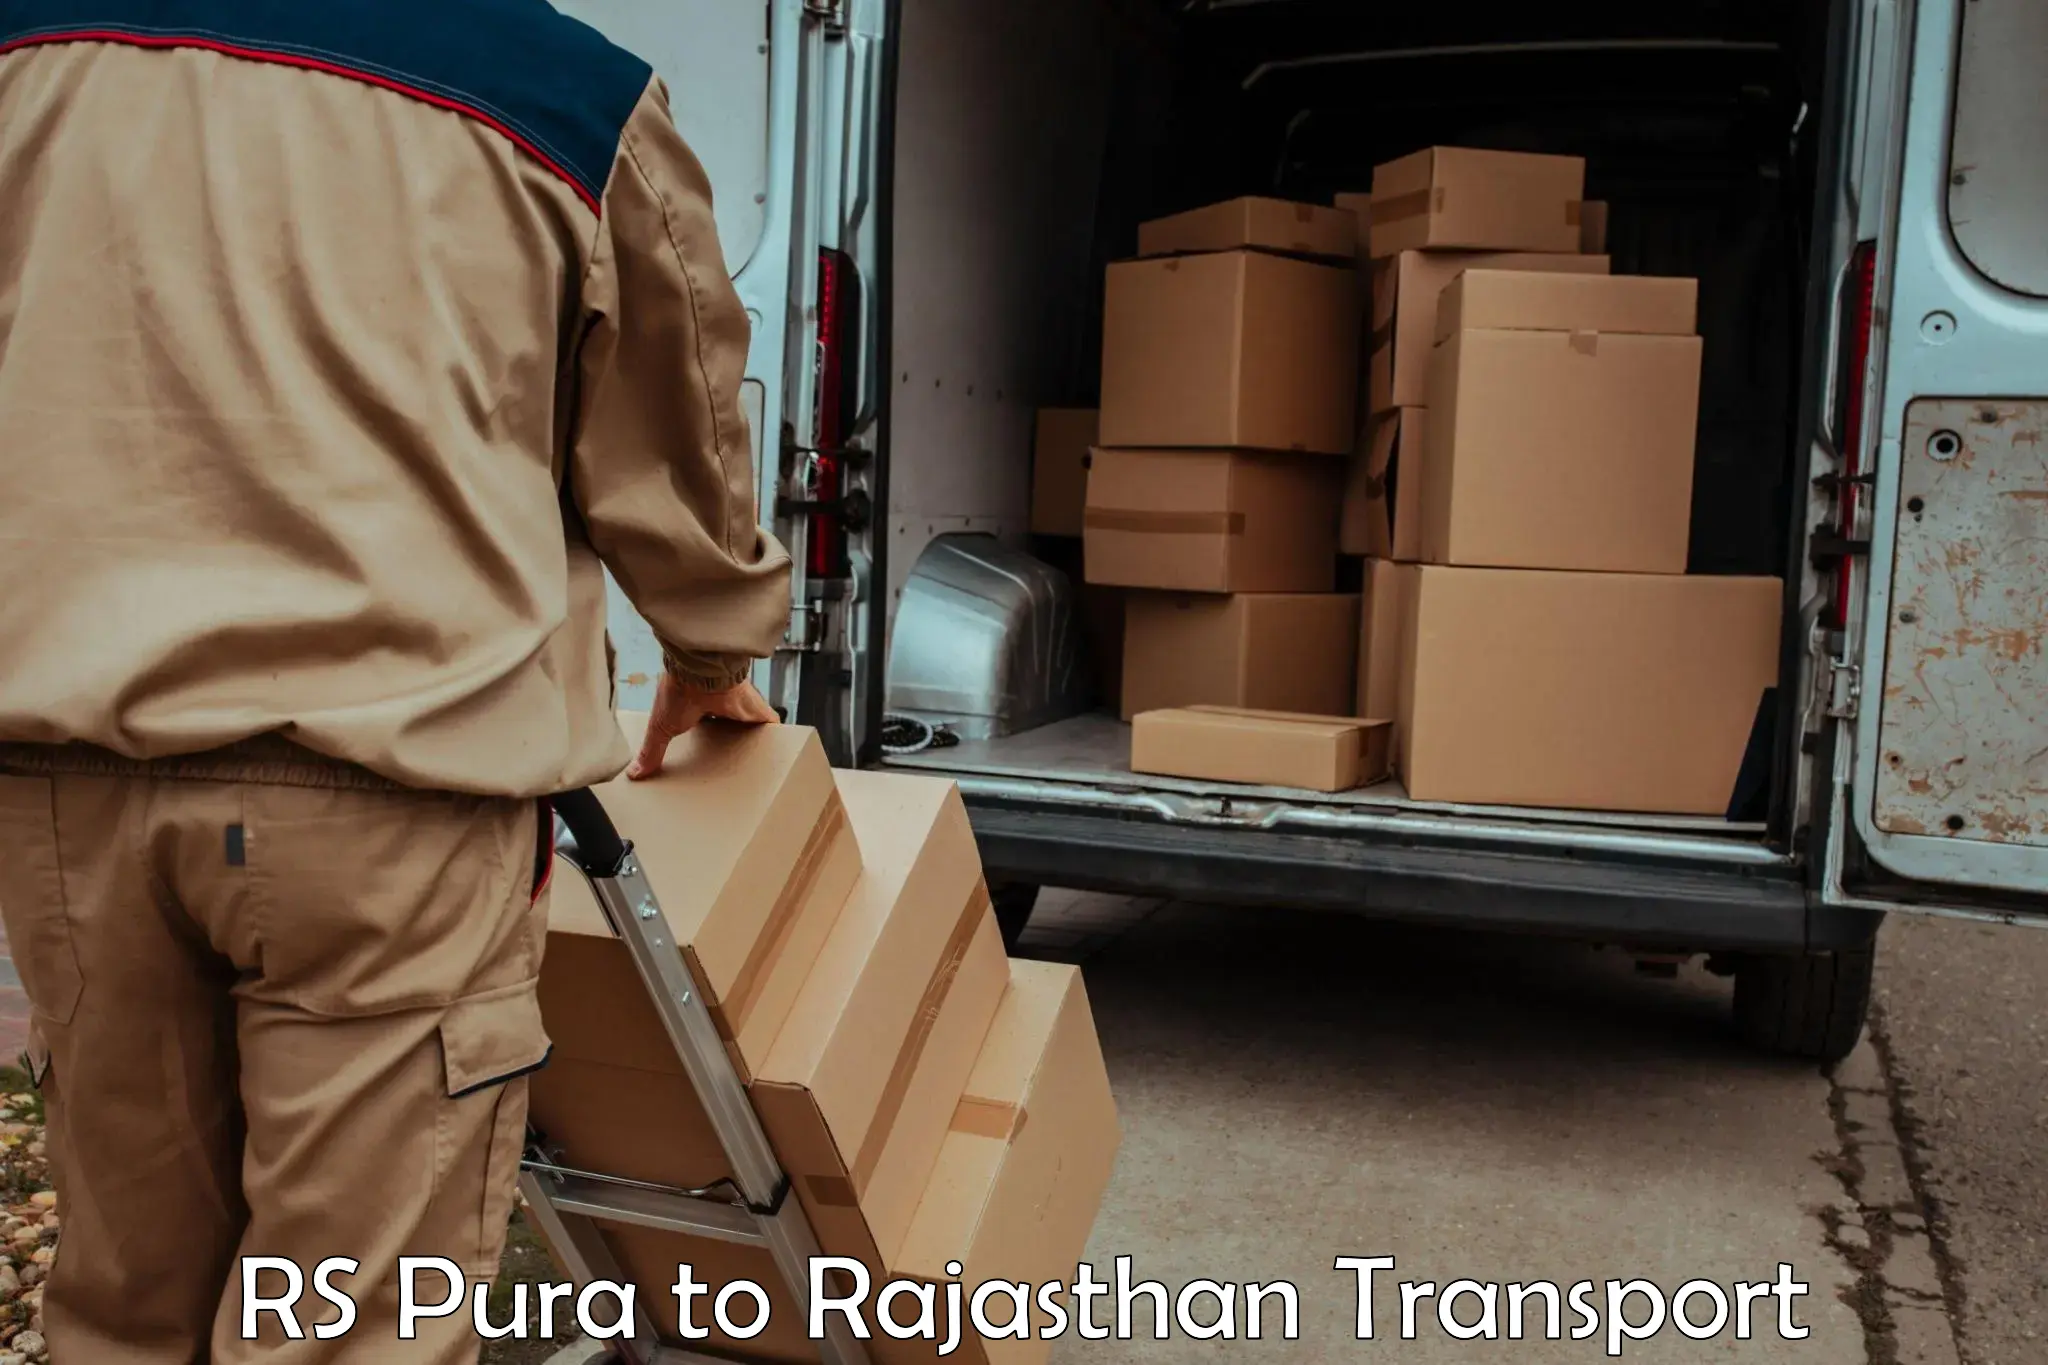 Daily parcel service transport in RS Pura to Itawa